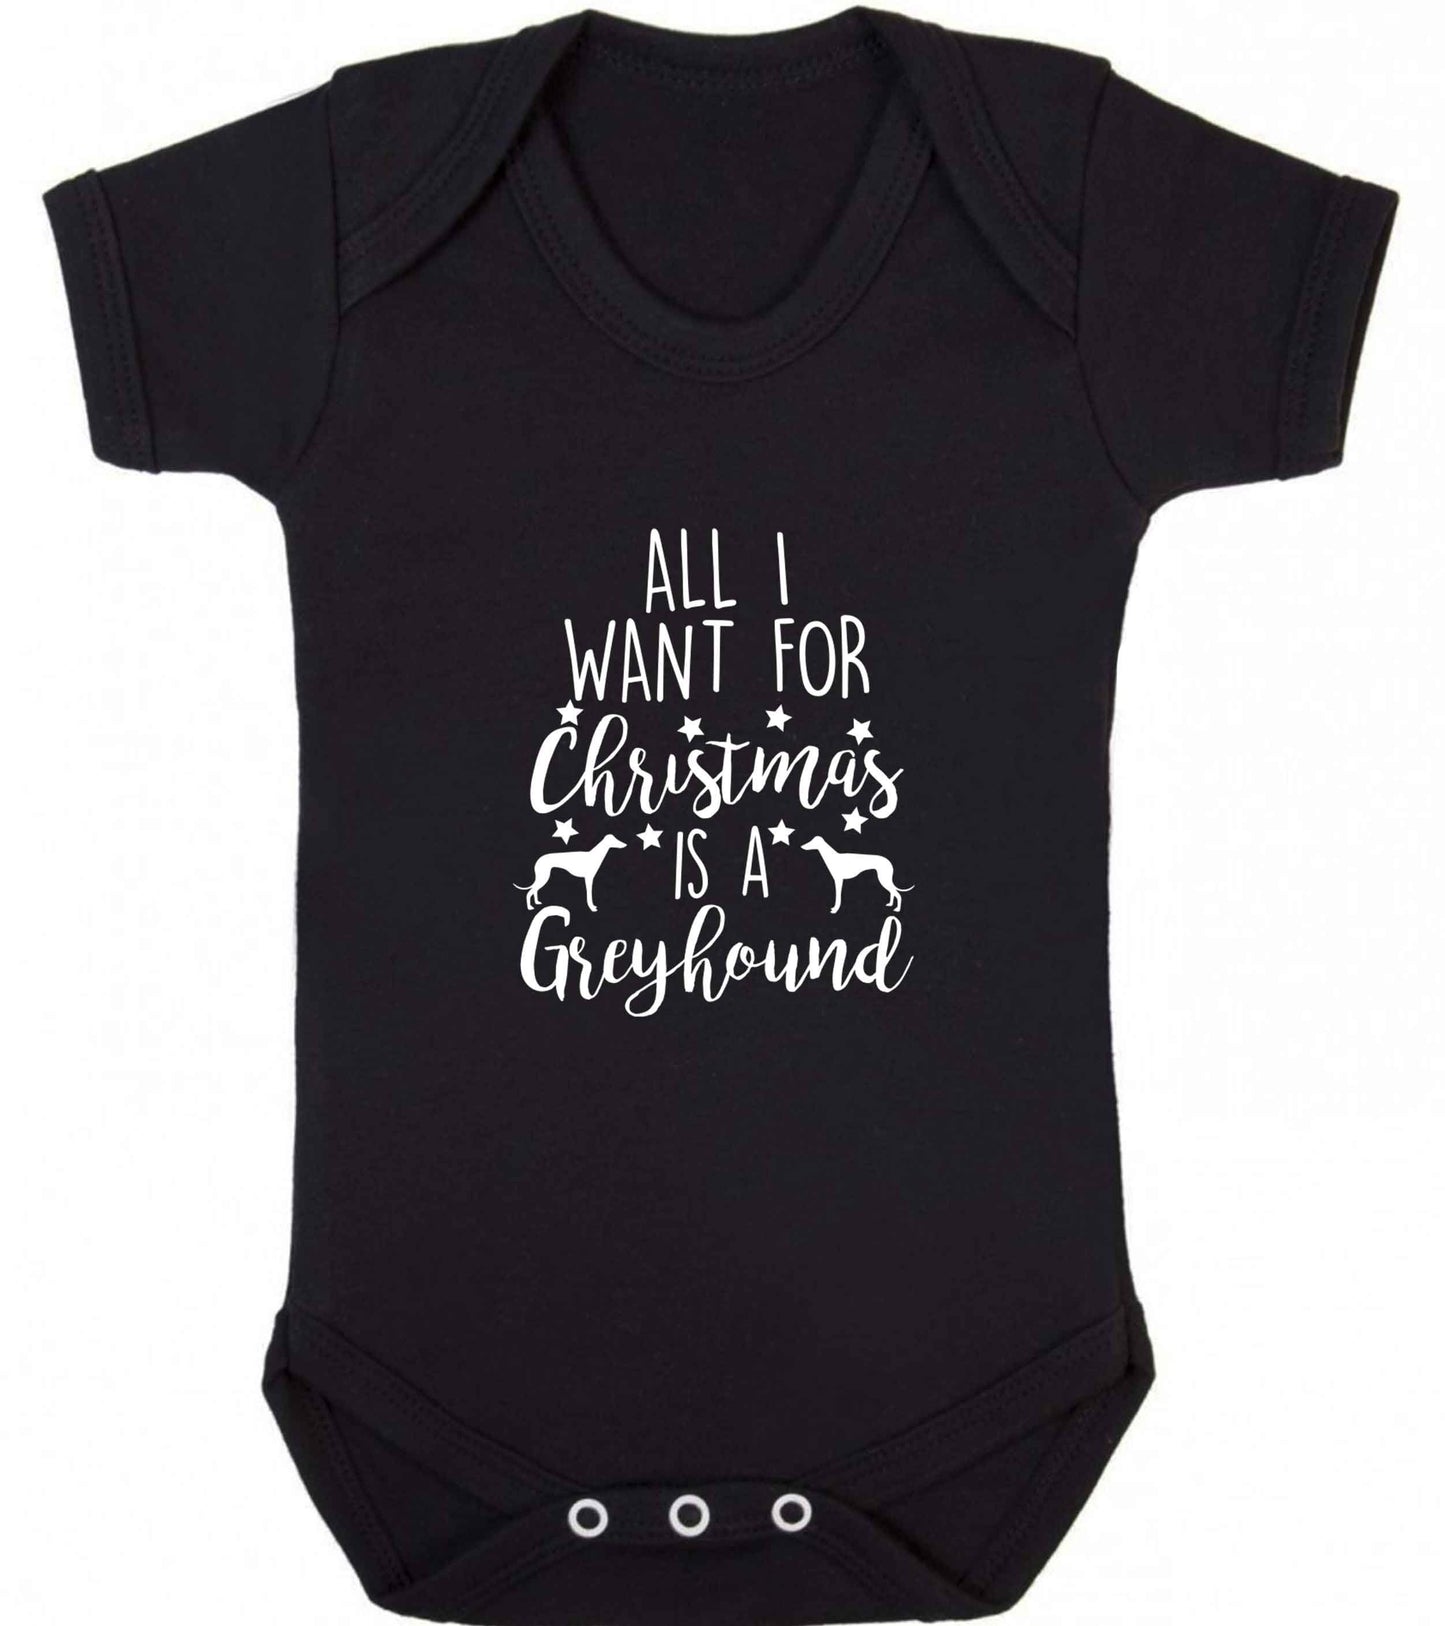 All I want for Christmas is a greyhound baby vest black 18-24 months